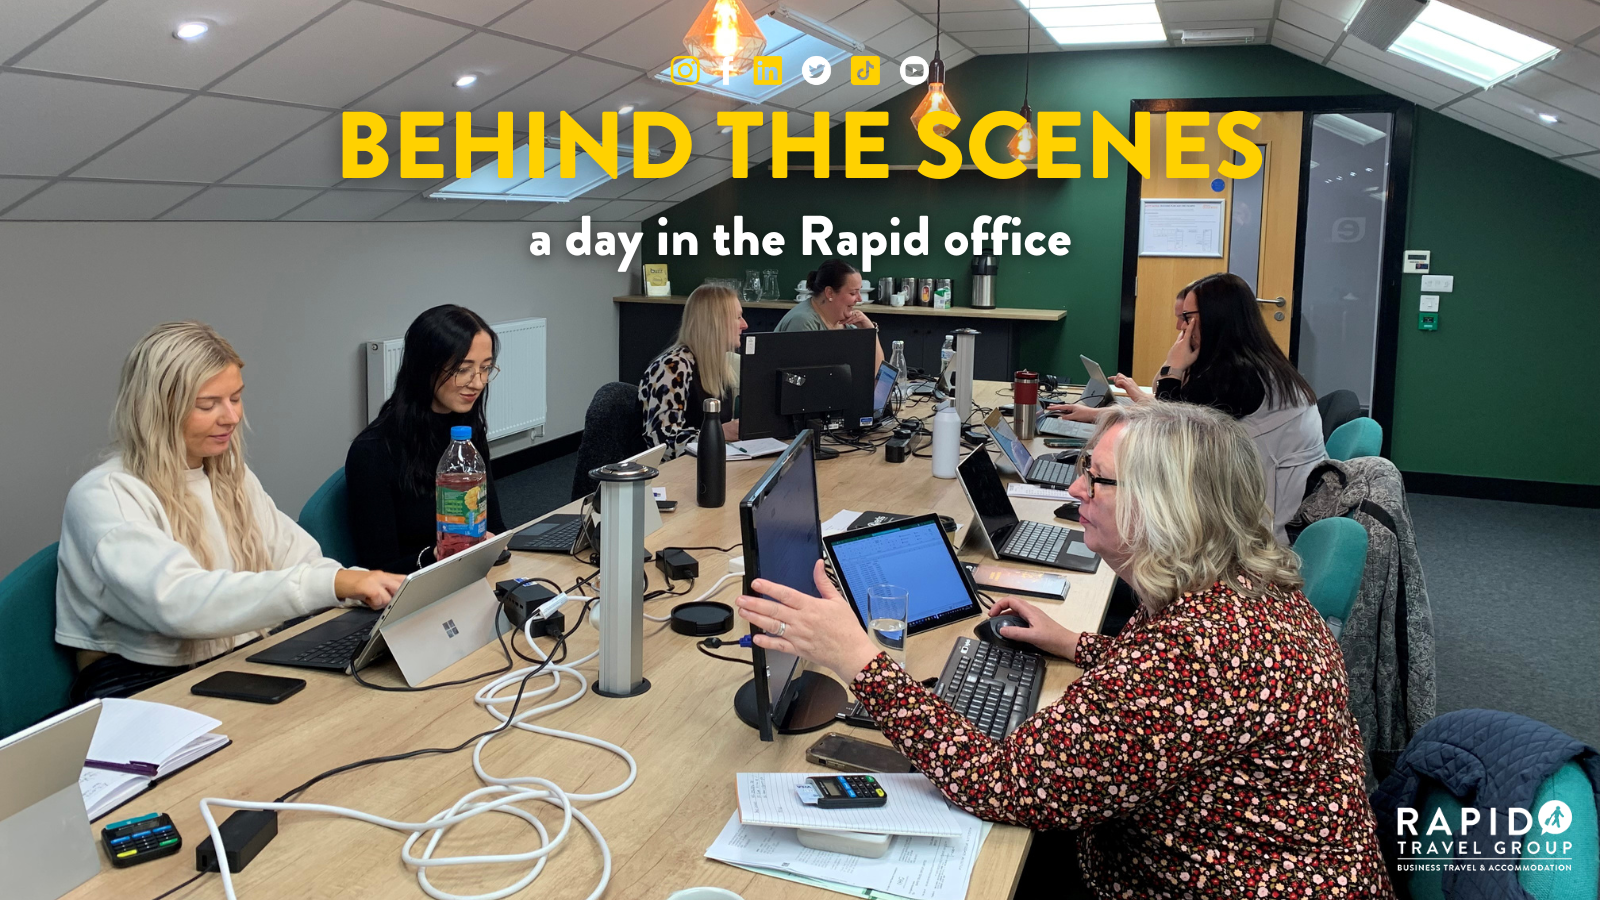 Behind the Scenes: a day in the Rapid office